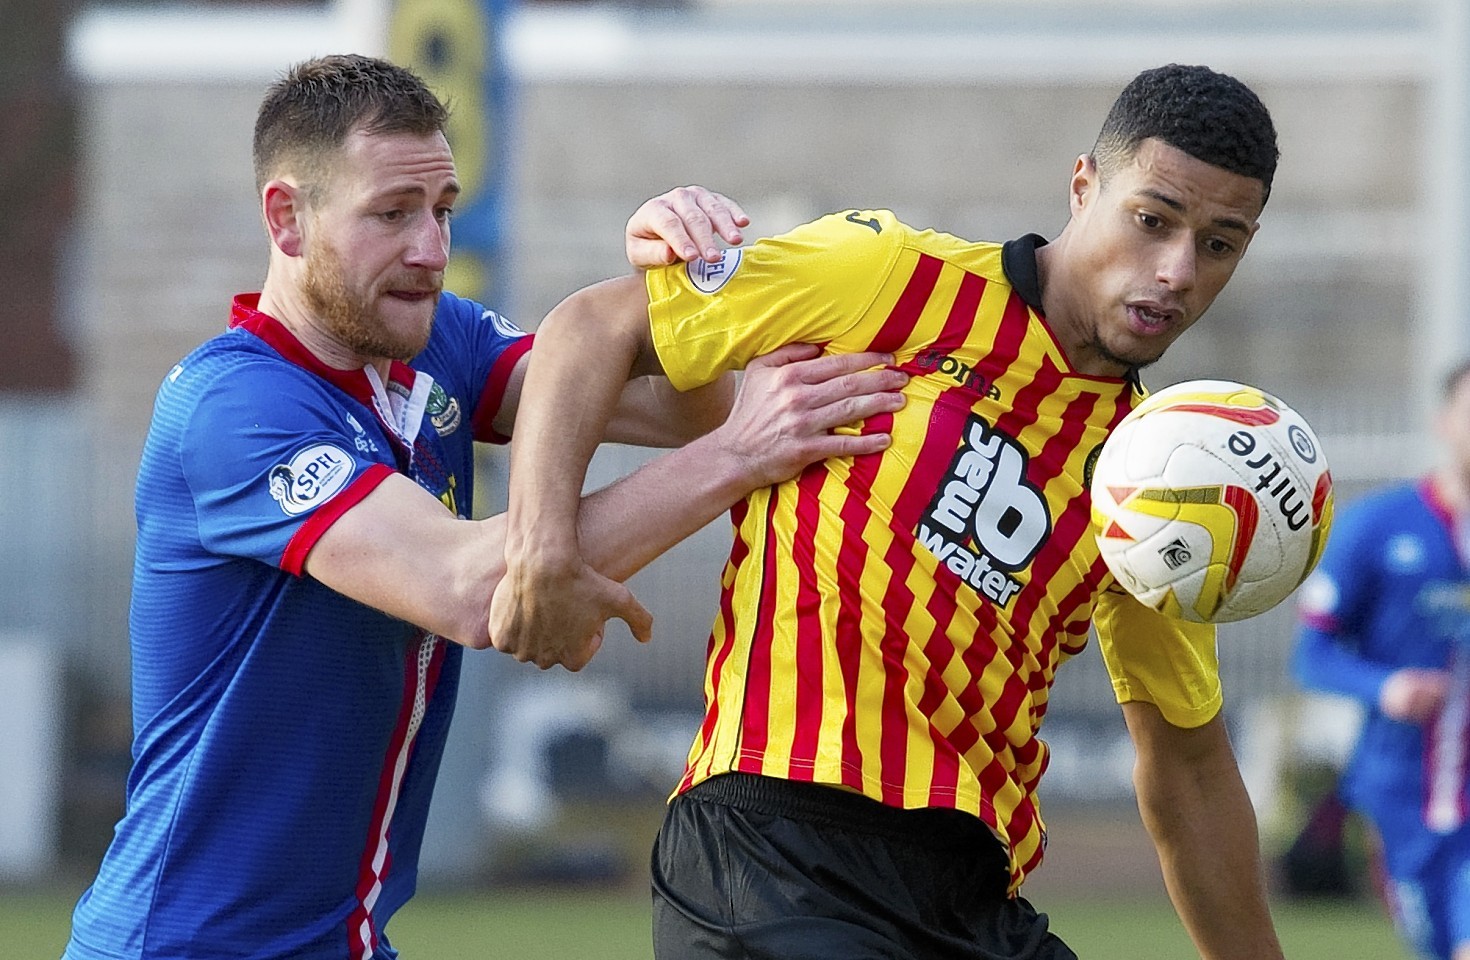 Warren is expected to return to the Inverness team tomorrow to reignite his battle with Partick Thistle forward Lyle Taylor